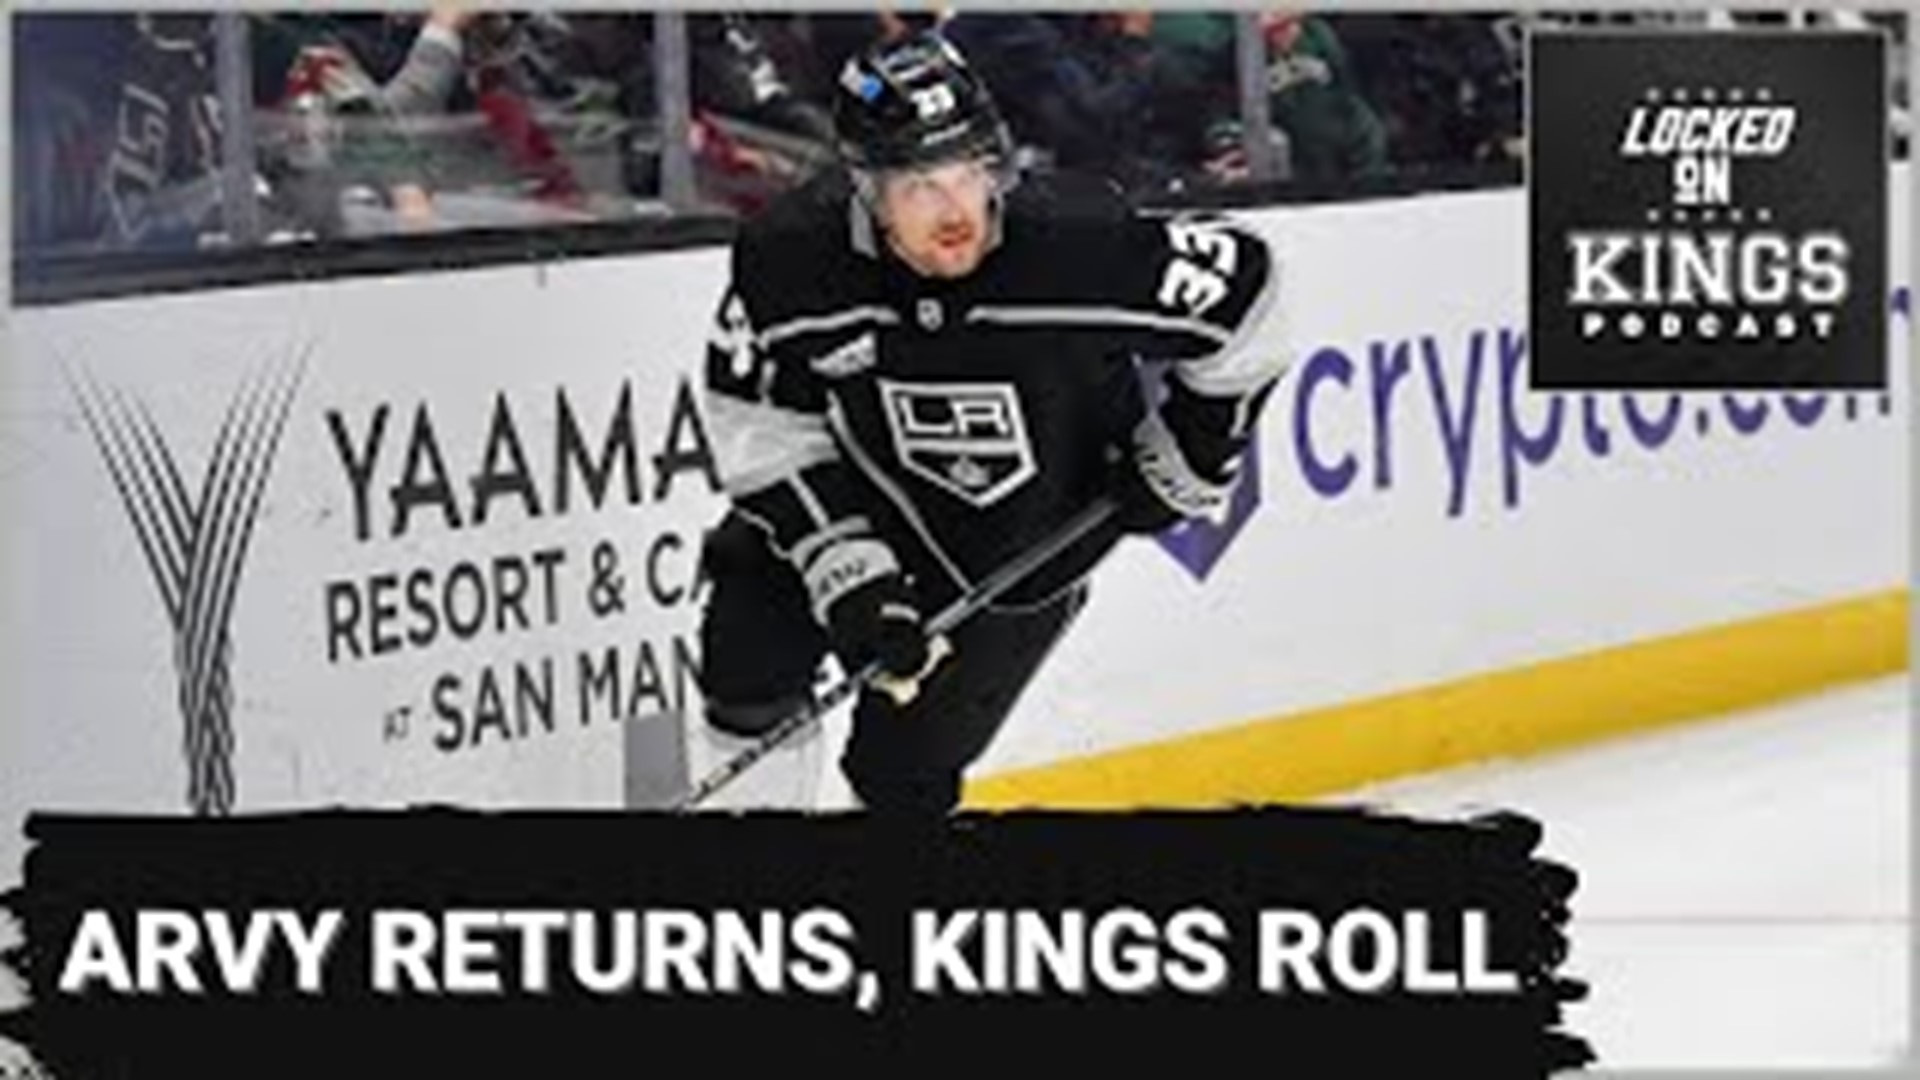 Viktor Arvidsson returns how did he look? Plus the Kings crush the Wild 6-0. That and more on this edition of Locked on LA Kings.